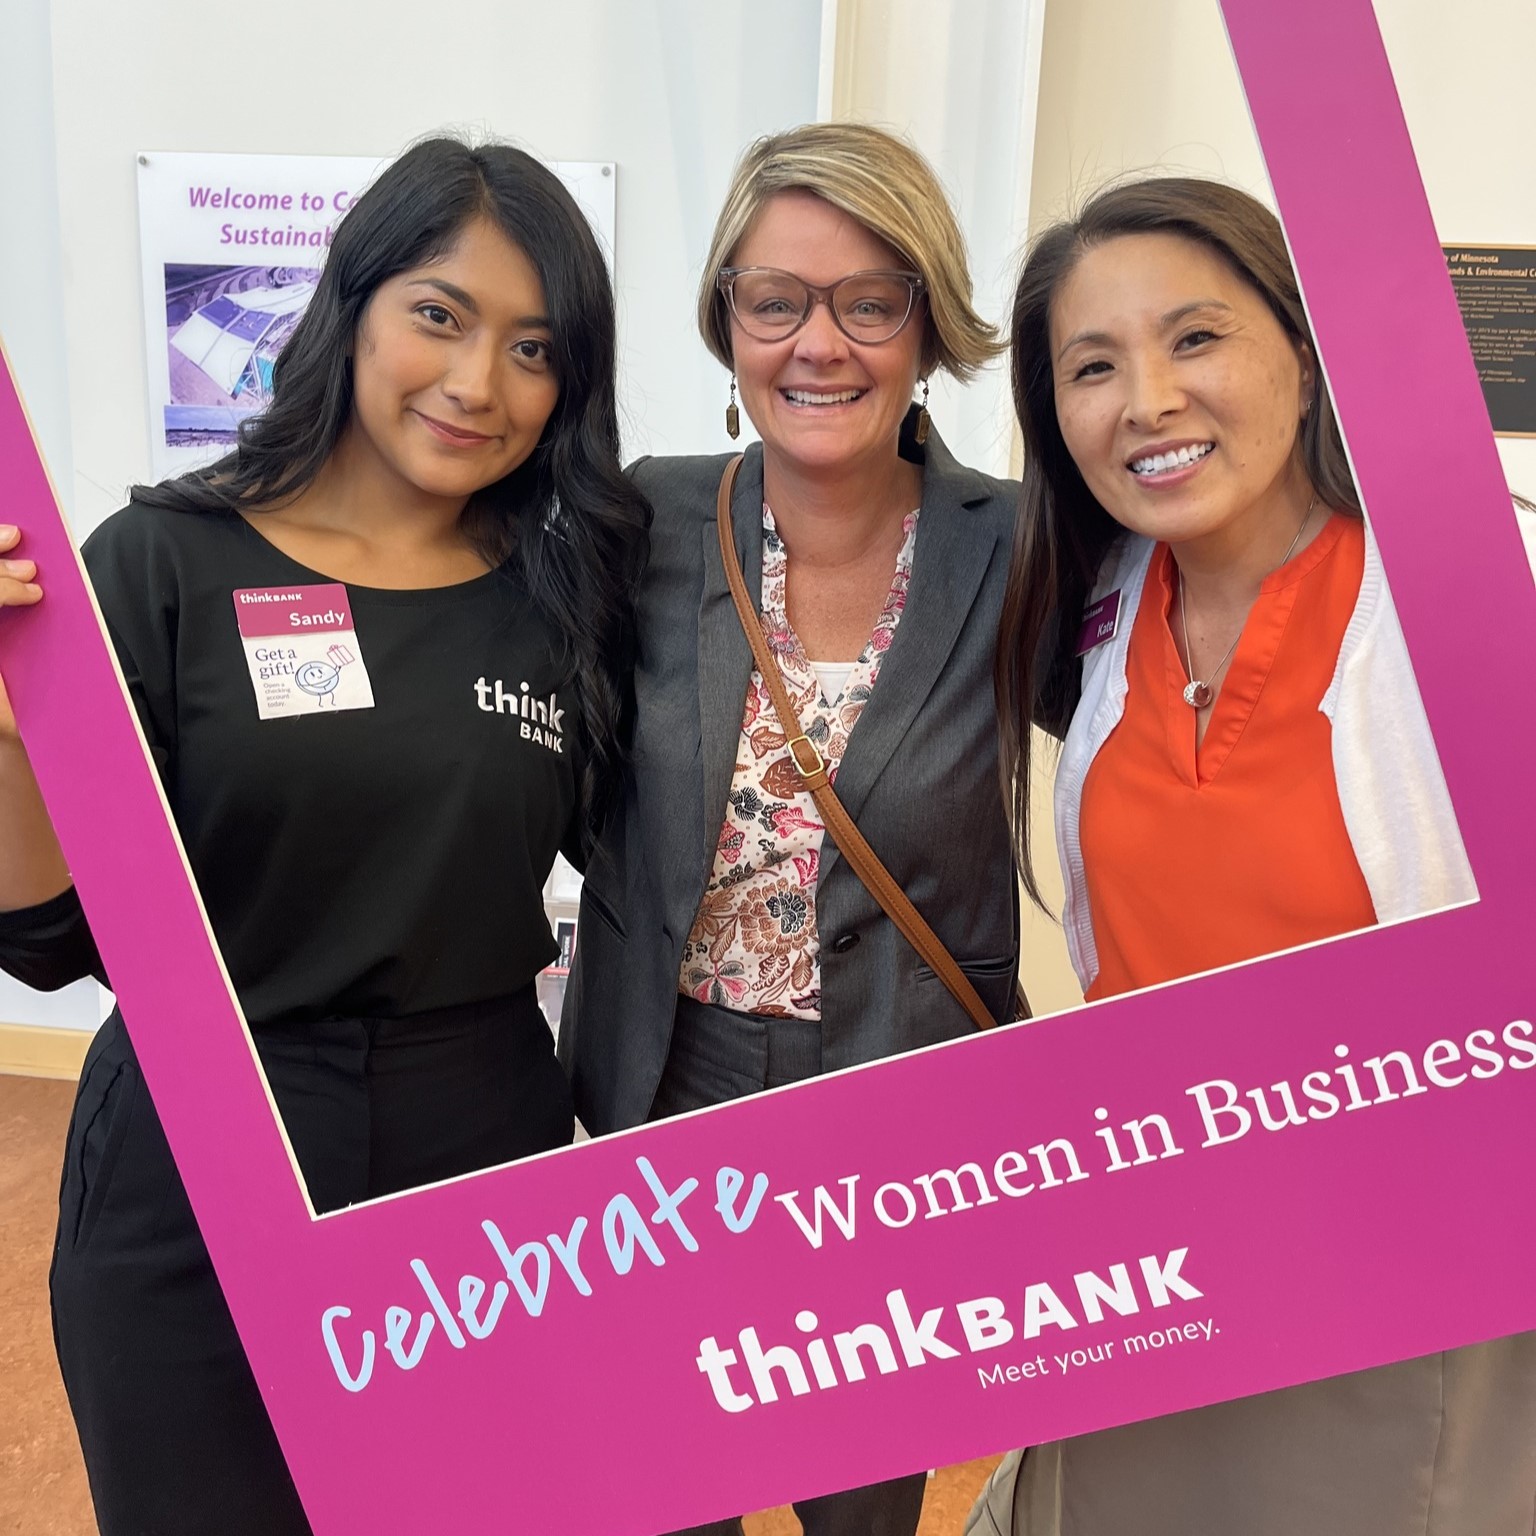 Think Bank employees holding a celebrate women in business sign.